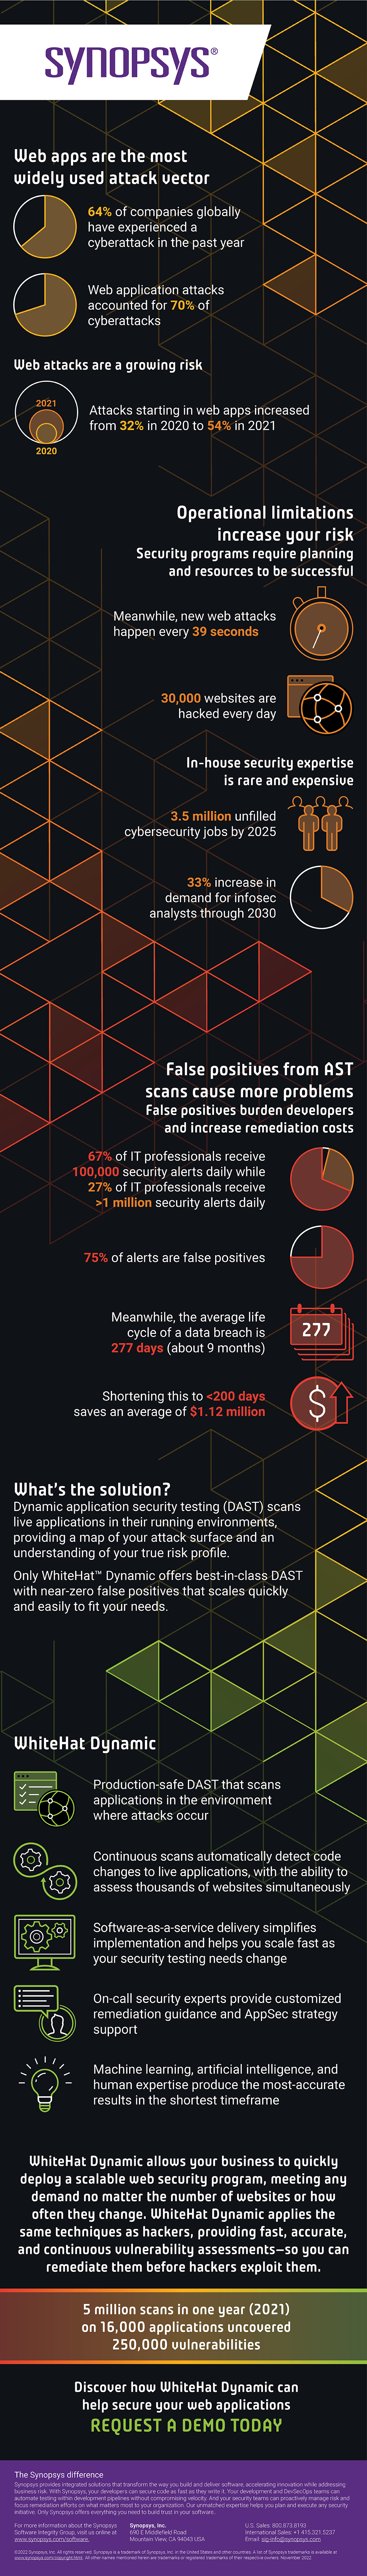 The Rise of Web App Attacks: Why Web Apps Are the Top Target for Hackers [Infographic]